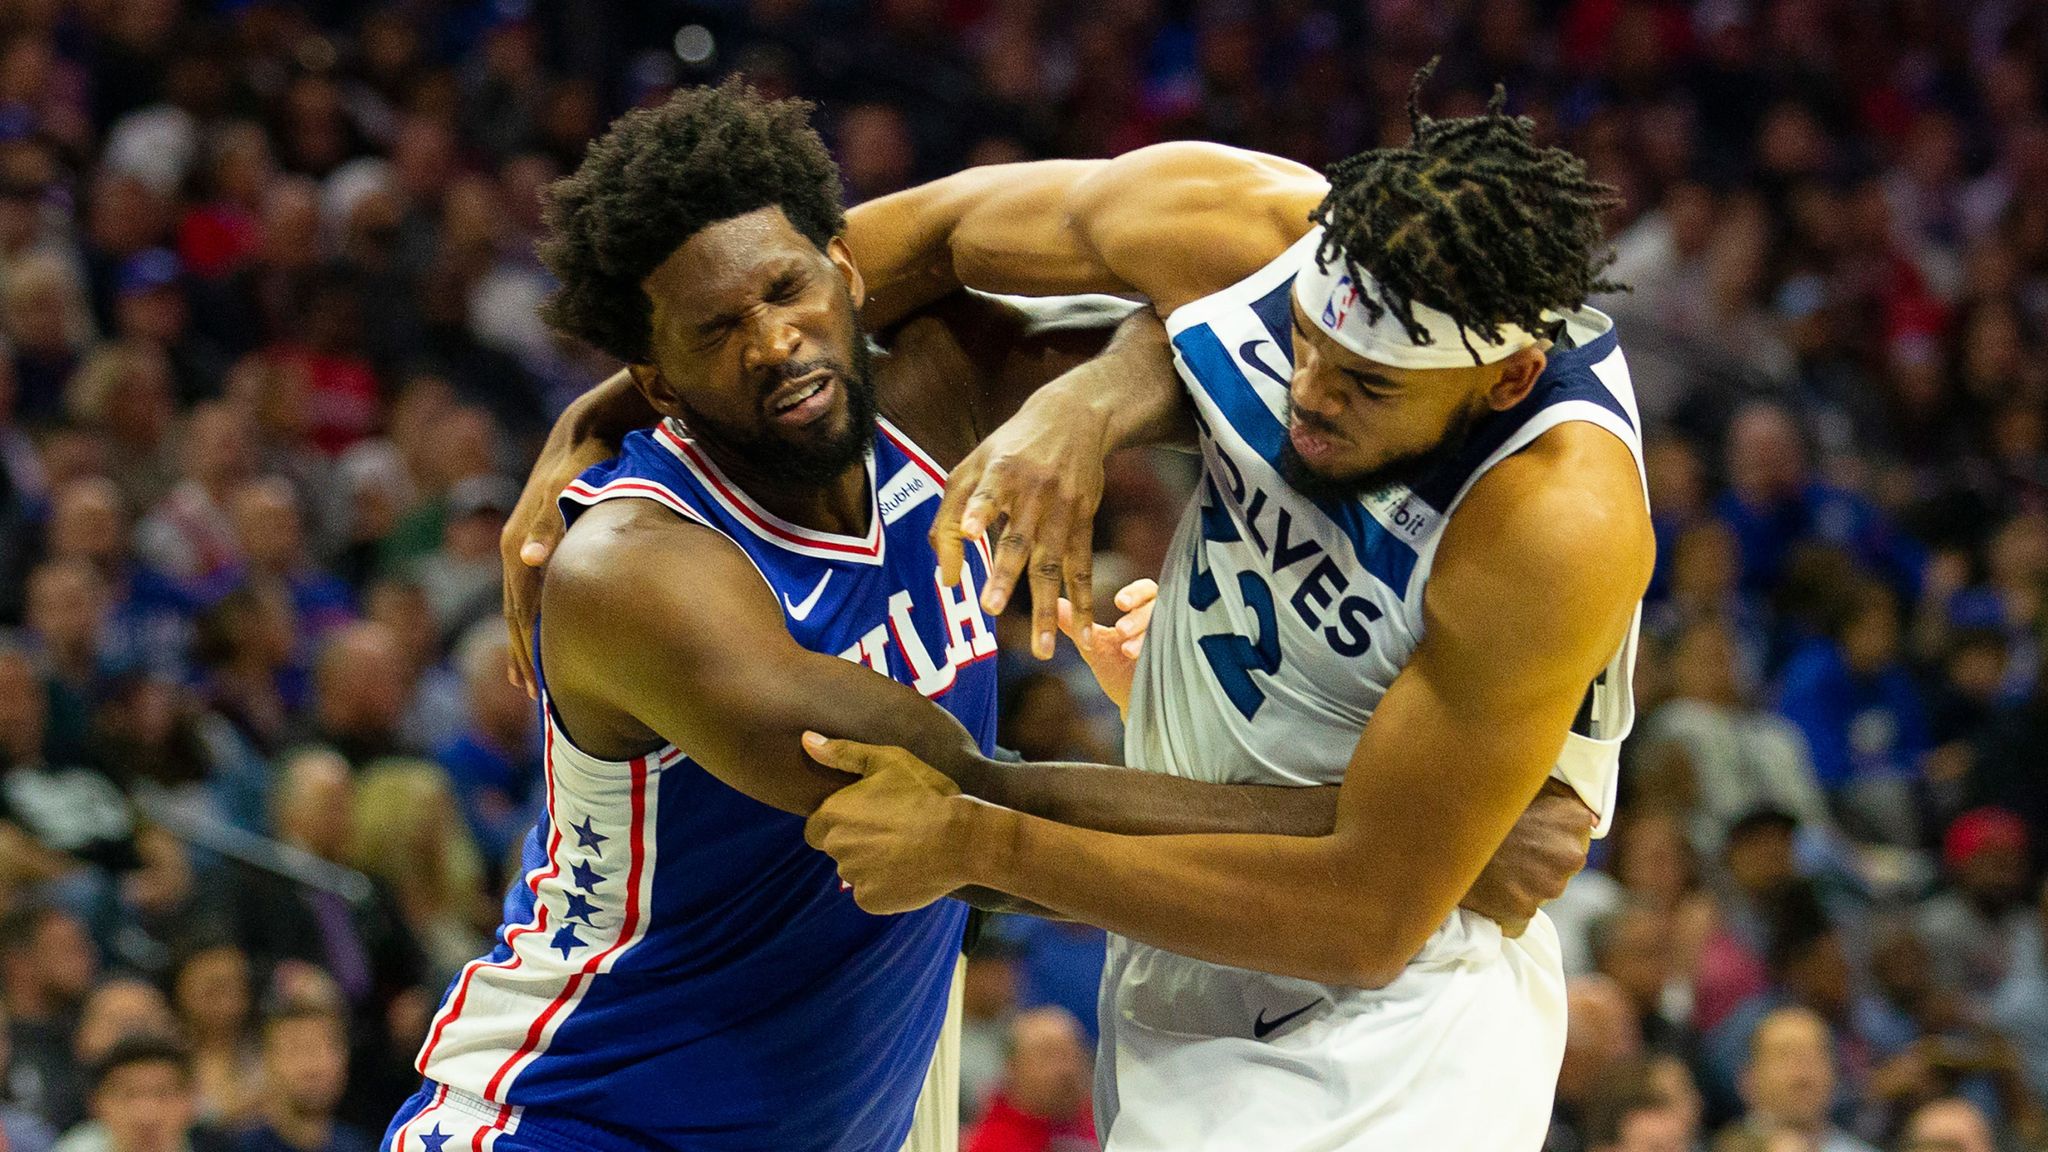 Flipboard: Joel Embiid and Karl-Anthony Towns ejected as 76ers beat Timberwolves